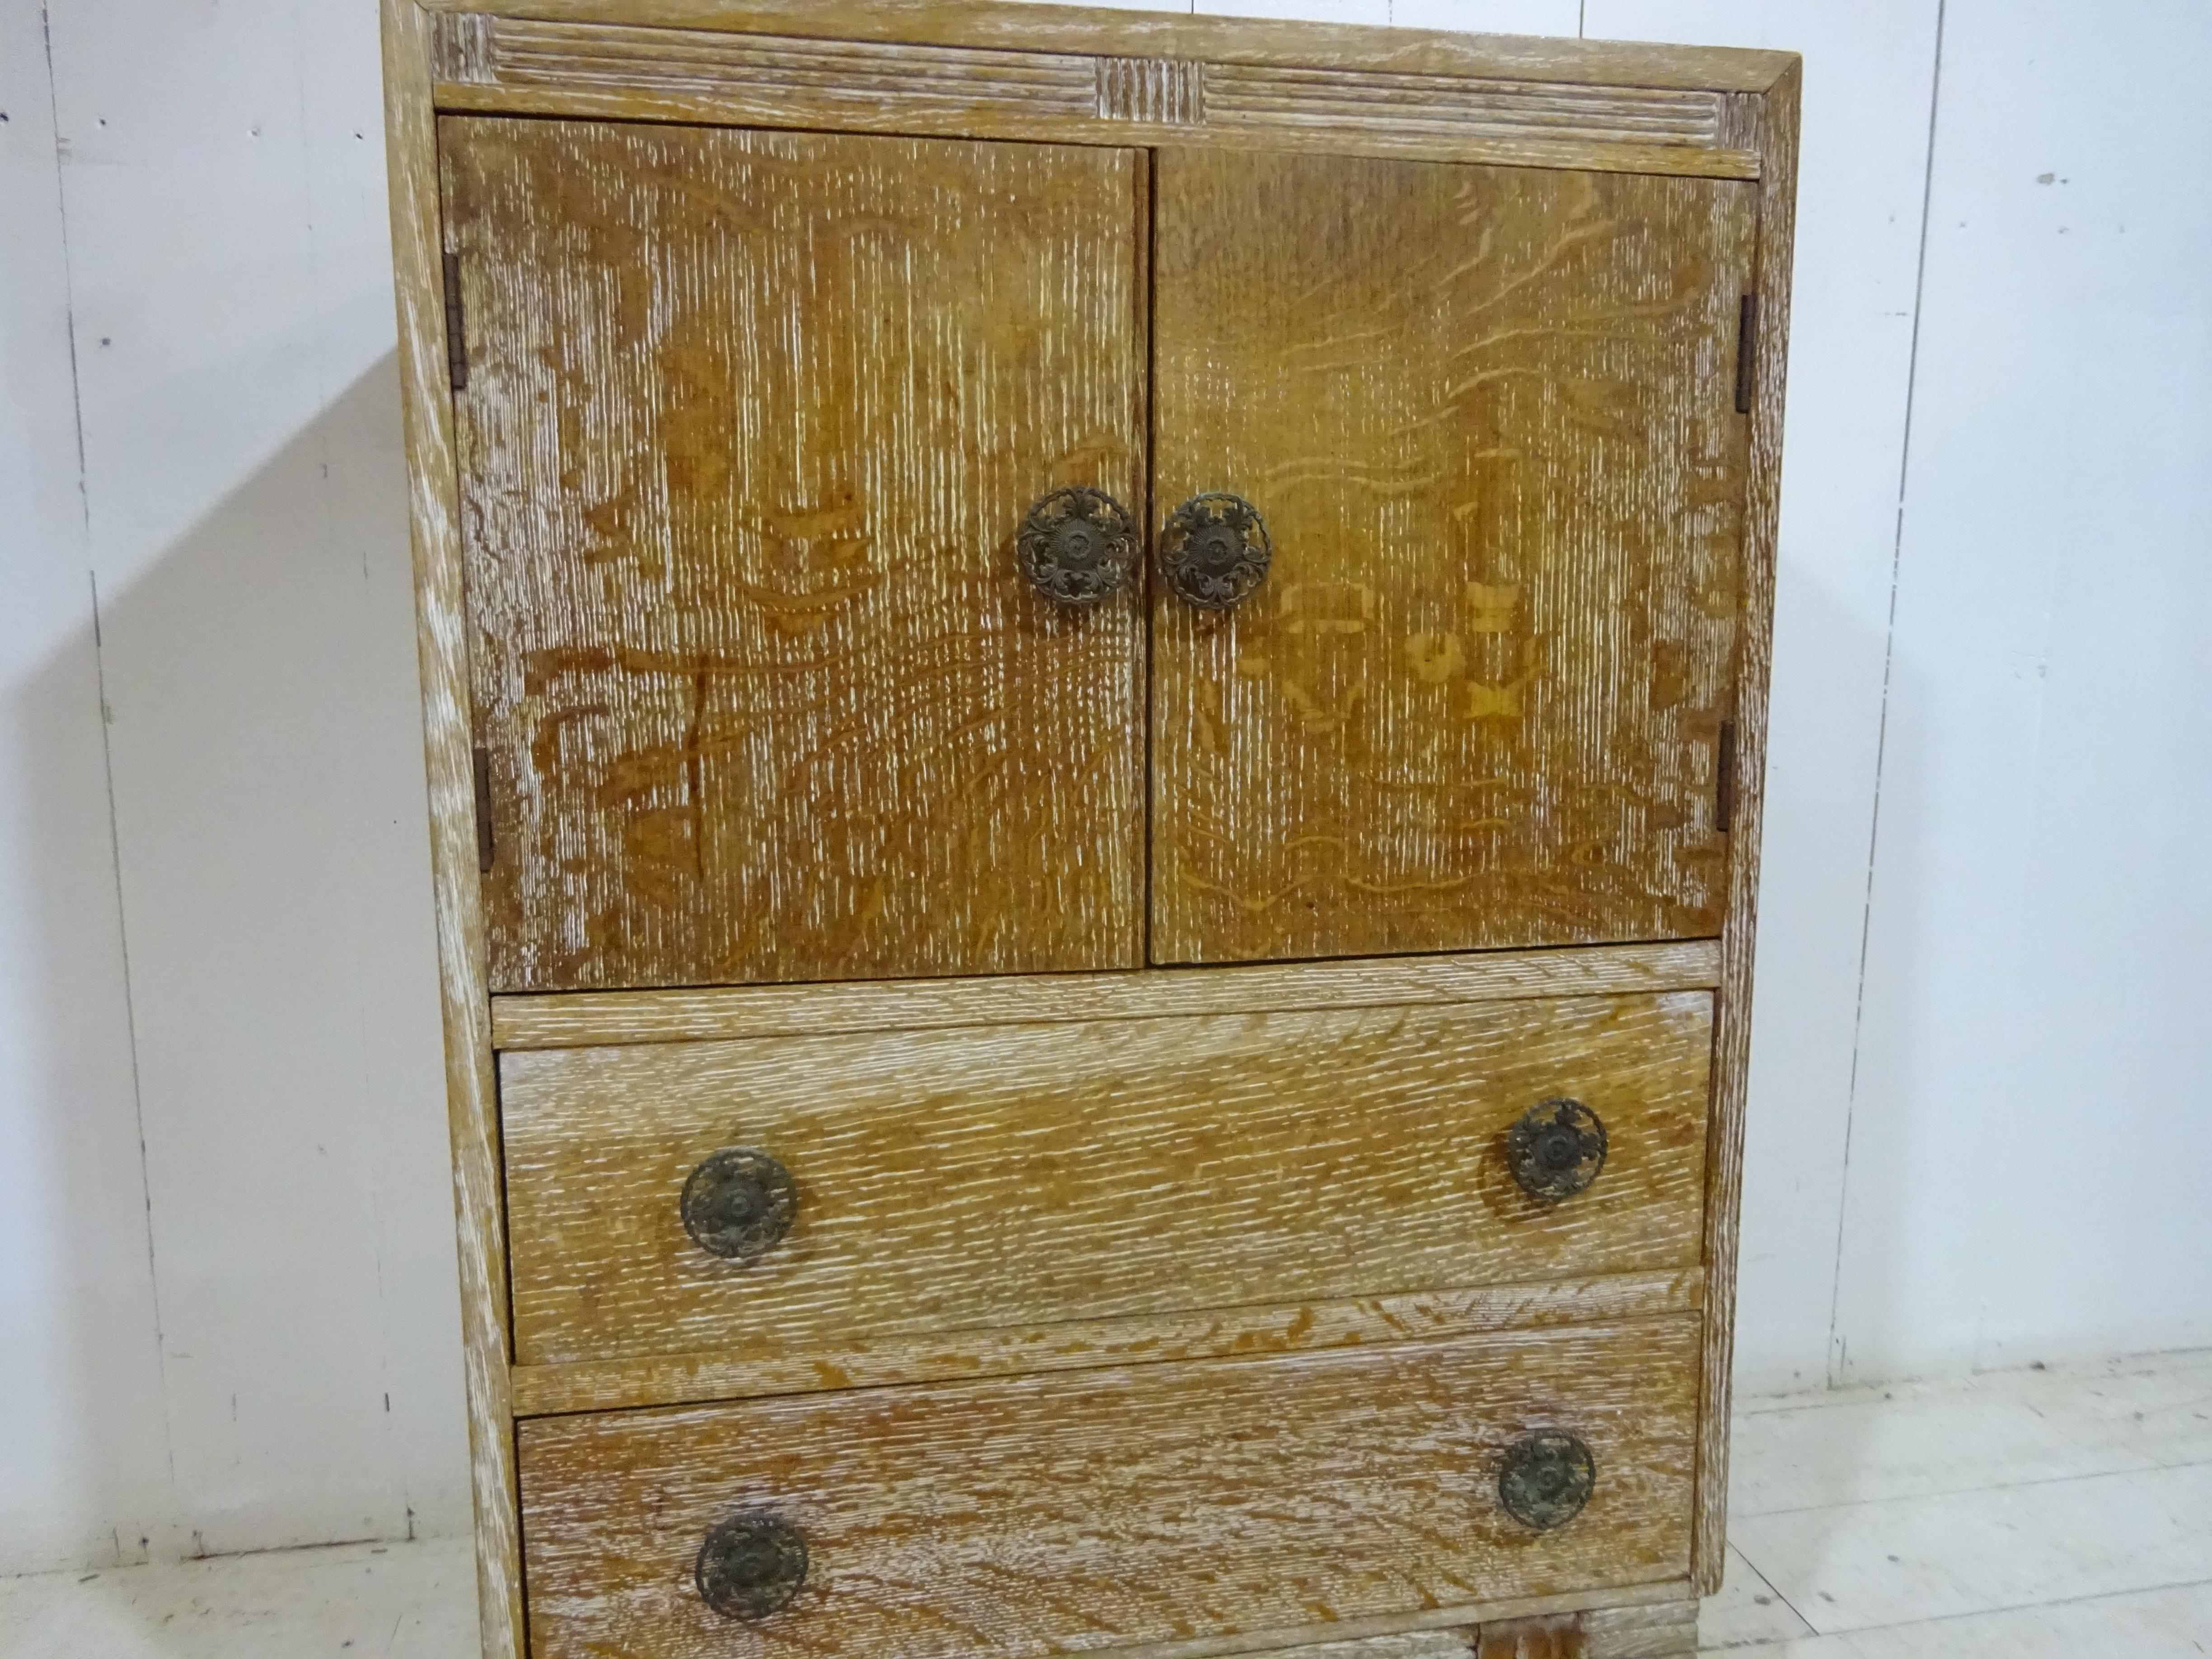 Dated circa 1930's this is a fabulous cabinet by Heals of London

Heal's (